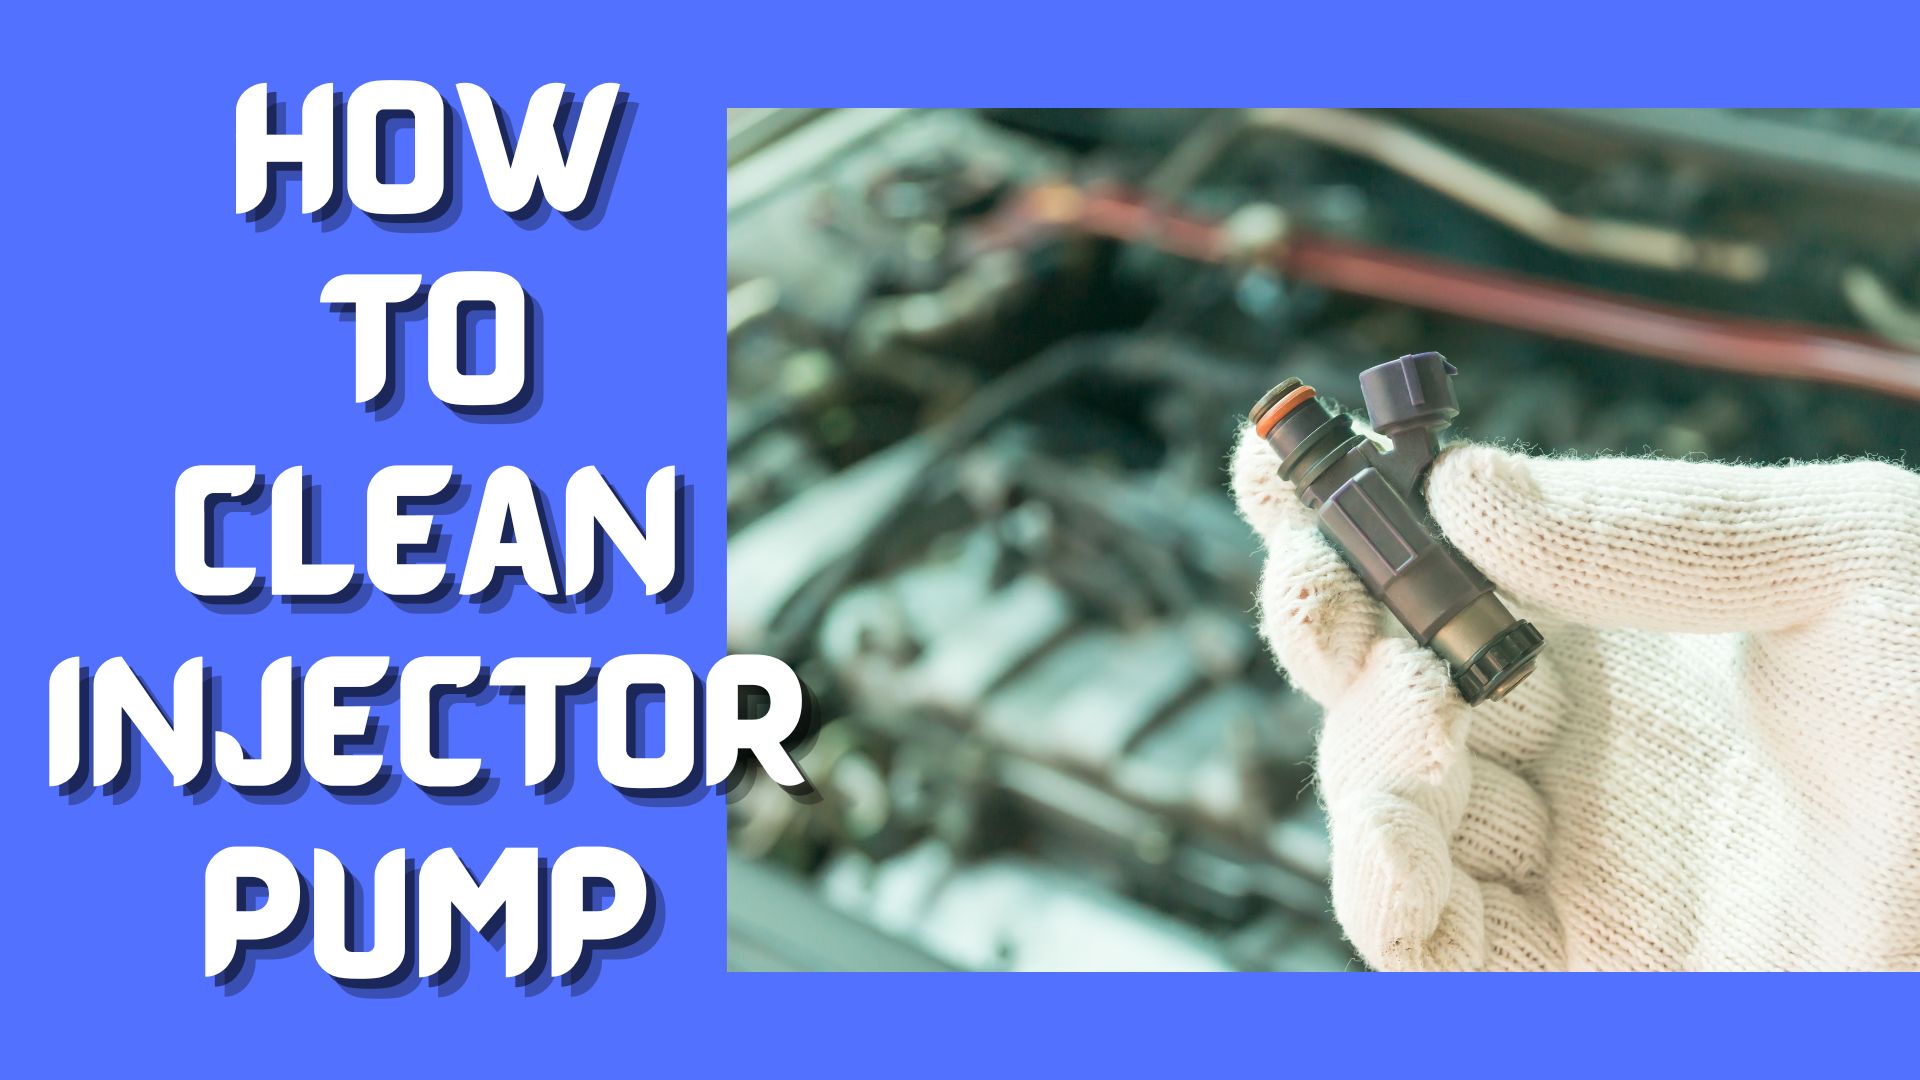 How To Clean Injector Pump Of a Truck Easily